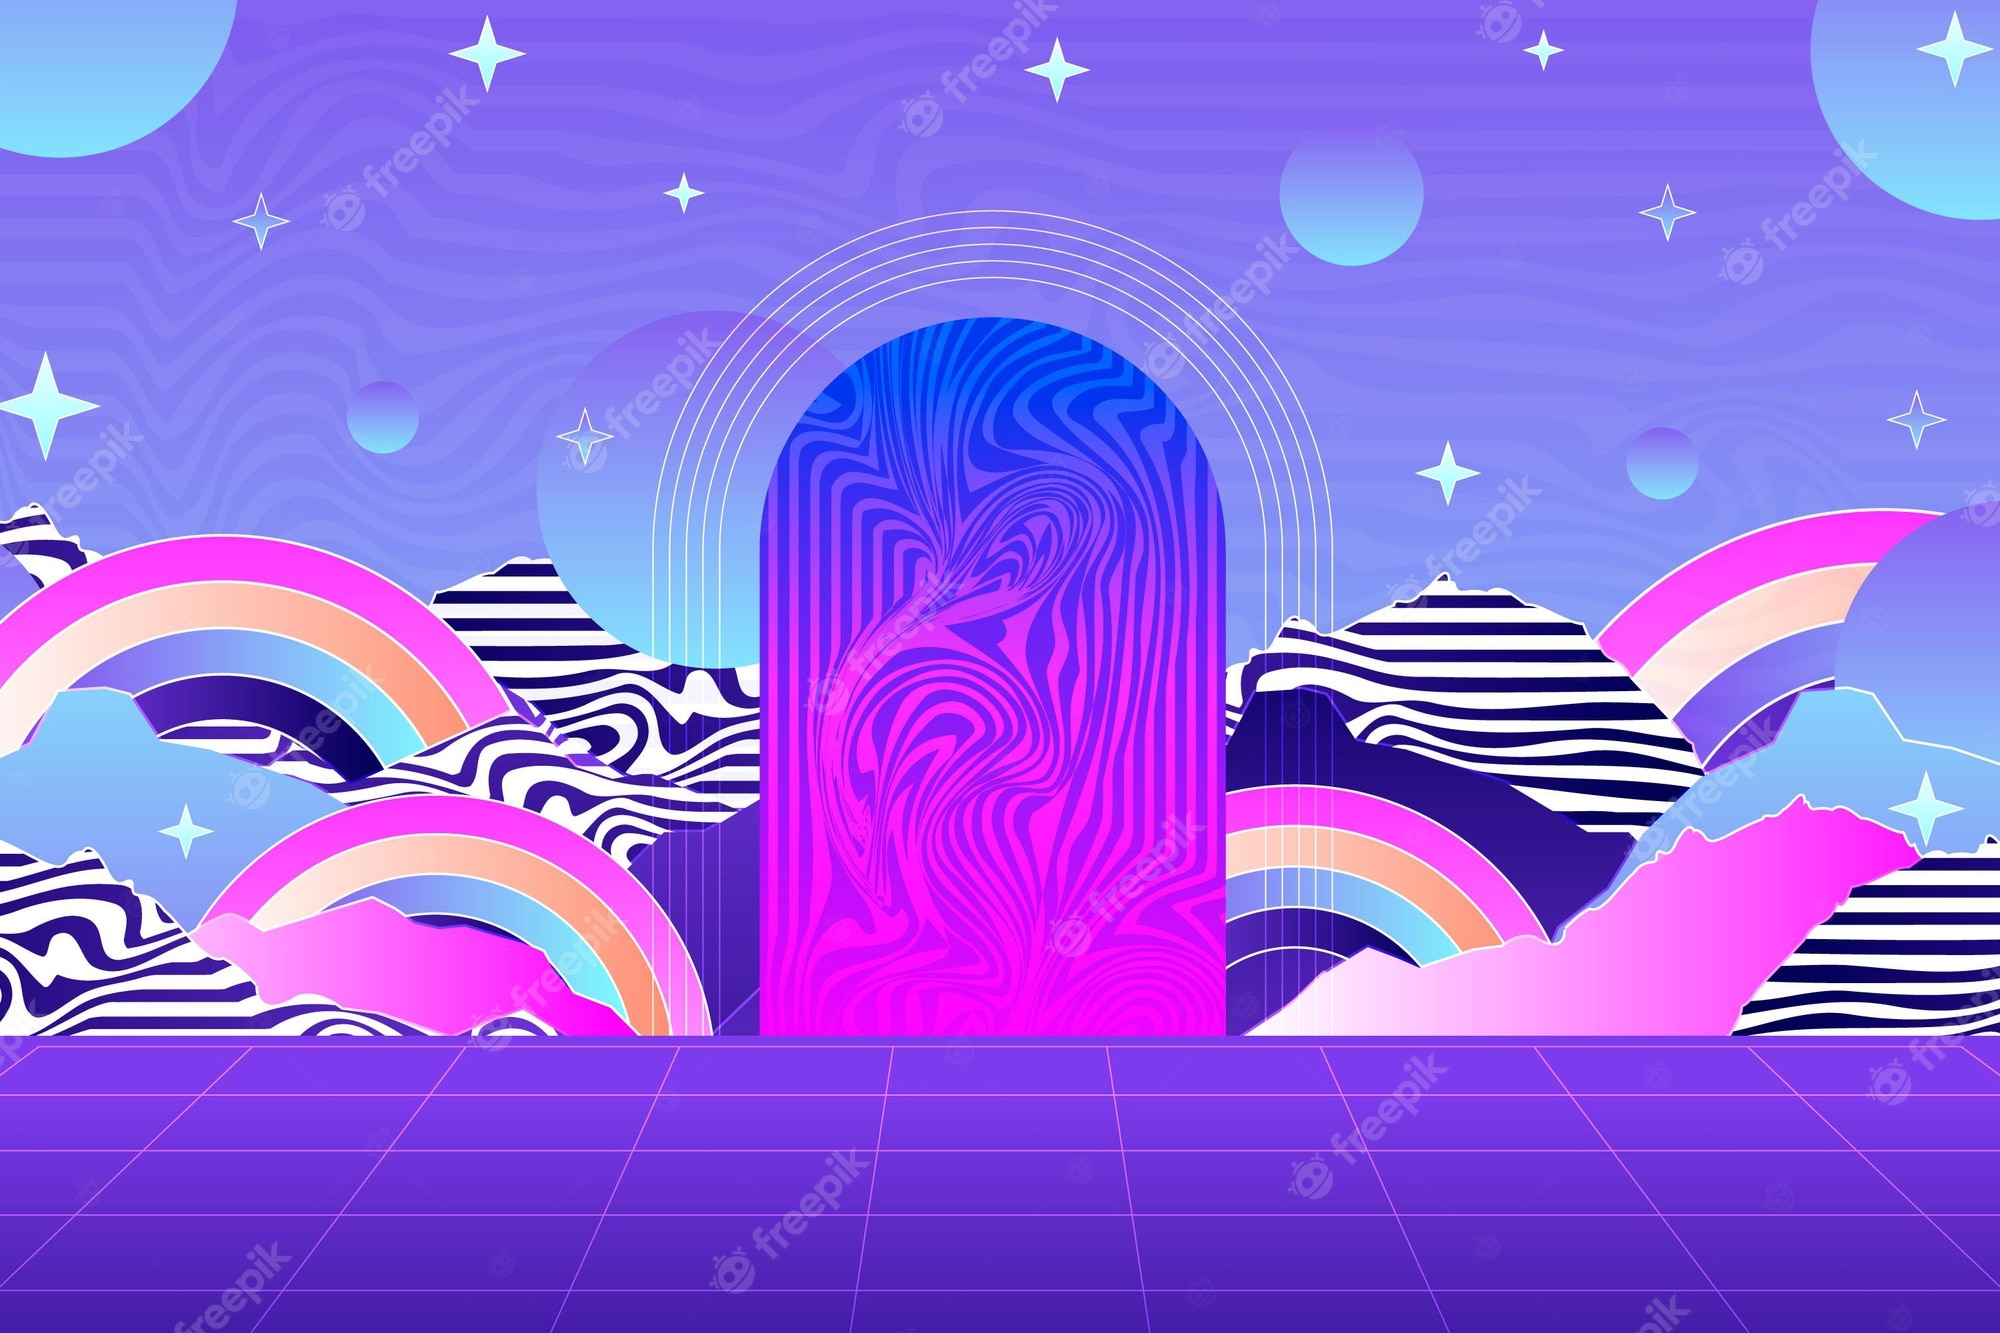 A purple abstract illustration with rainbow clouds and stars - Vaporwave